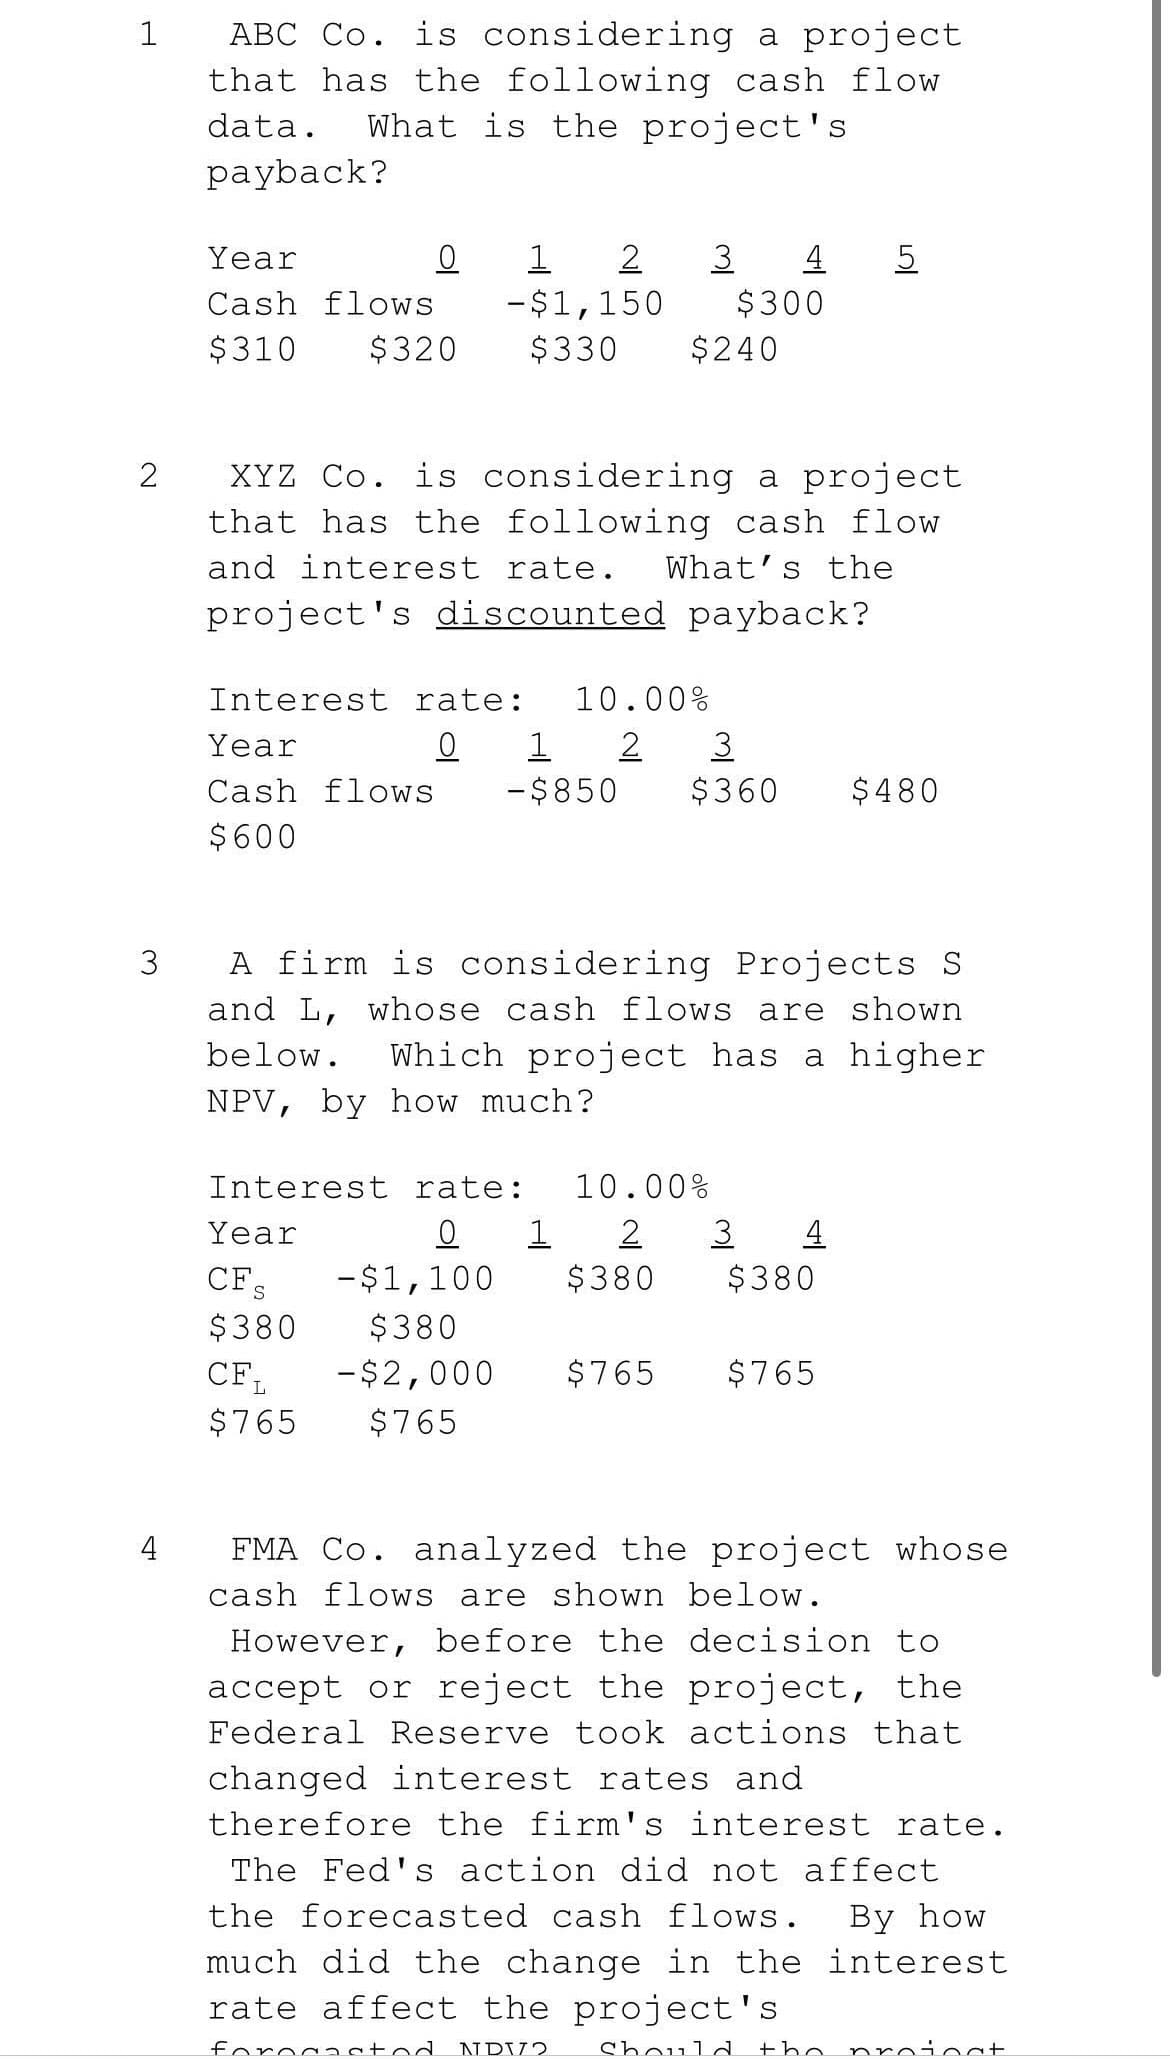 ABC Co. is considering a project
that has the following cash flow
What is the project's
data.
payback?
Year
1
2
3
4
5
Cash flows
-$1,150
$300
$310
$320
$330
$240
XYZ Co. is considering a project
that has the following cash flow
and interest rate.
What's the
project's discounted payback?
Interest rate:
10.00%
Year
1 2
3
Cash flows
-$850
$360
$480
$600
3
A firm is considering Projects S
and L, whose cash flows are shown
below.
Which project has a higher
NPV, by how much?
Interest rate:
10.00%
Year
1
2
3 4
-$1,100
$380
$380
CFs
$380
$380
-$2,000
$765
$765
CF,
$765
$765
FMA Co. analyzed the project whose
cash flows are shown below.
4
However, before the decision to
accept or reject the project, the
Federal Reserve took actions that
changed interest rates and
therefore the firm's interest rate.
The Fed's action did not affect
the forecasted cash flows.
By how
much did the change in the interest
rate affect the project's
fo:
NDV2
Should
the
nro:
